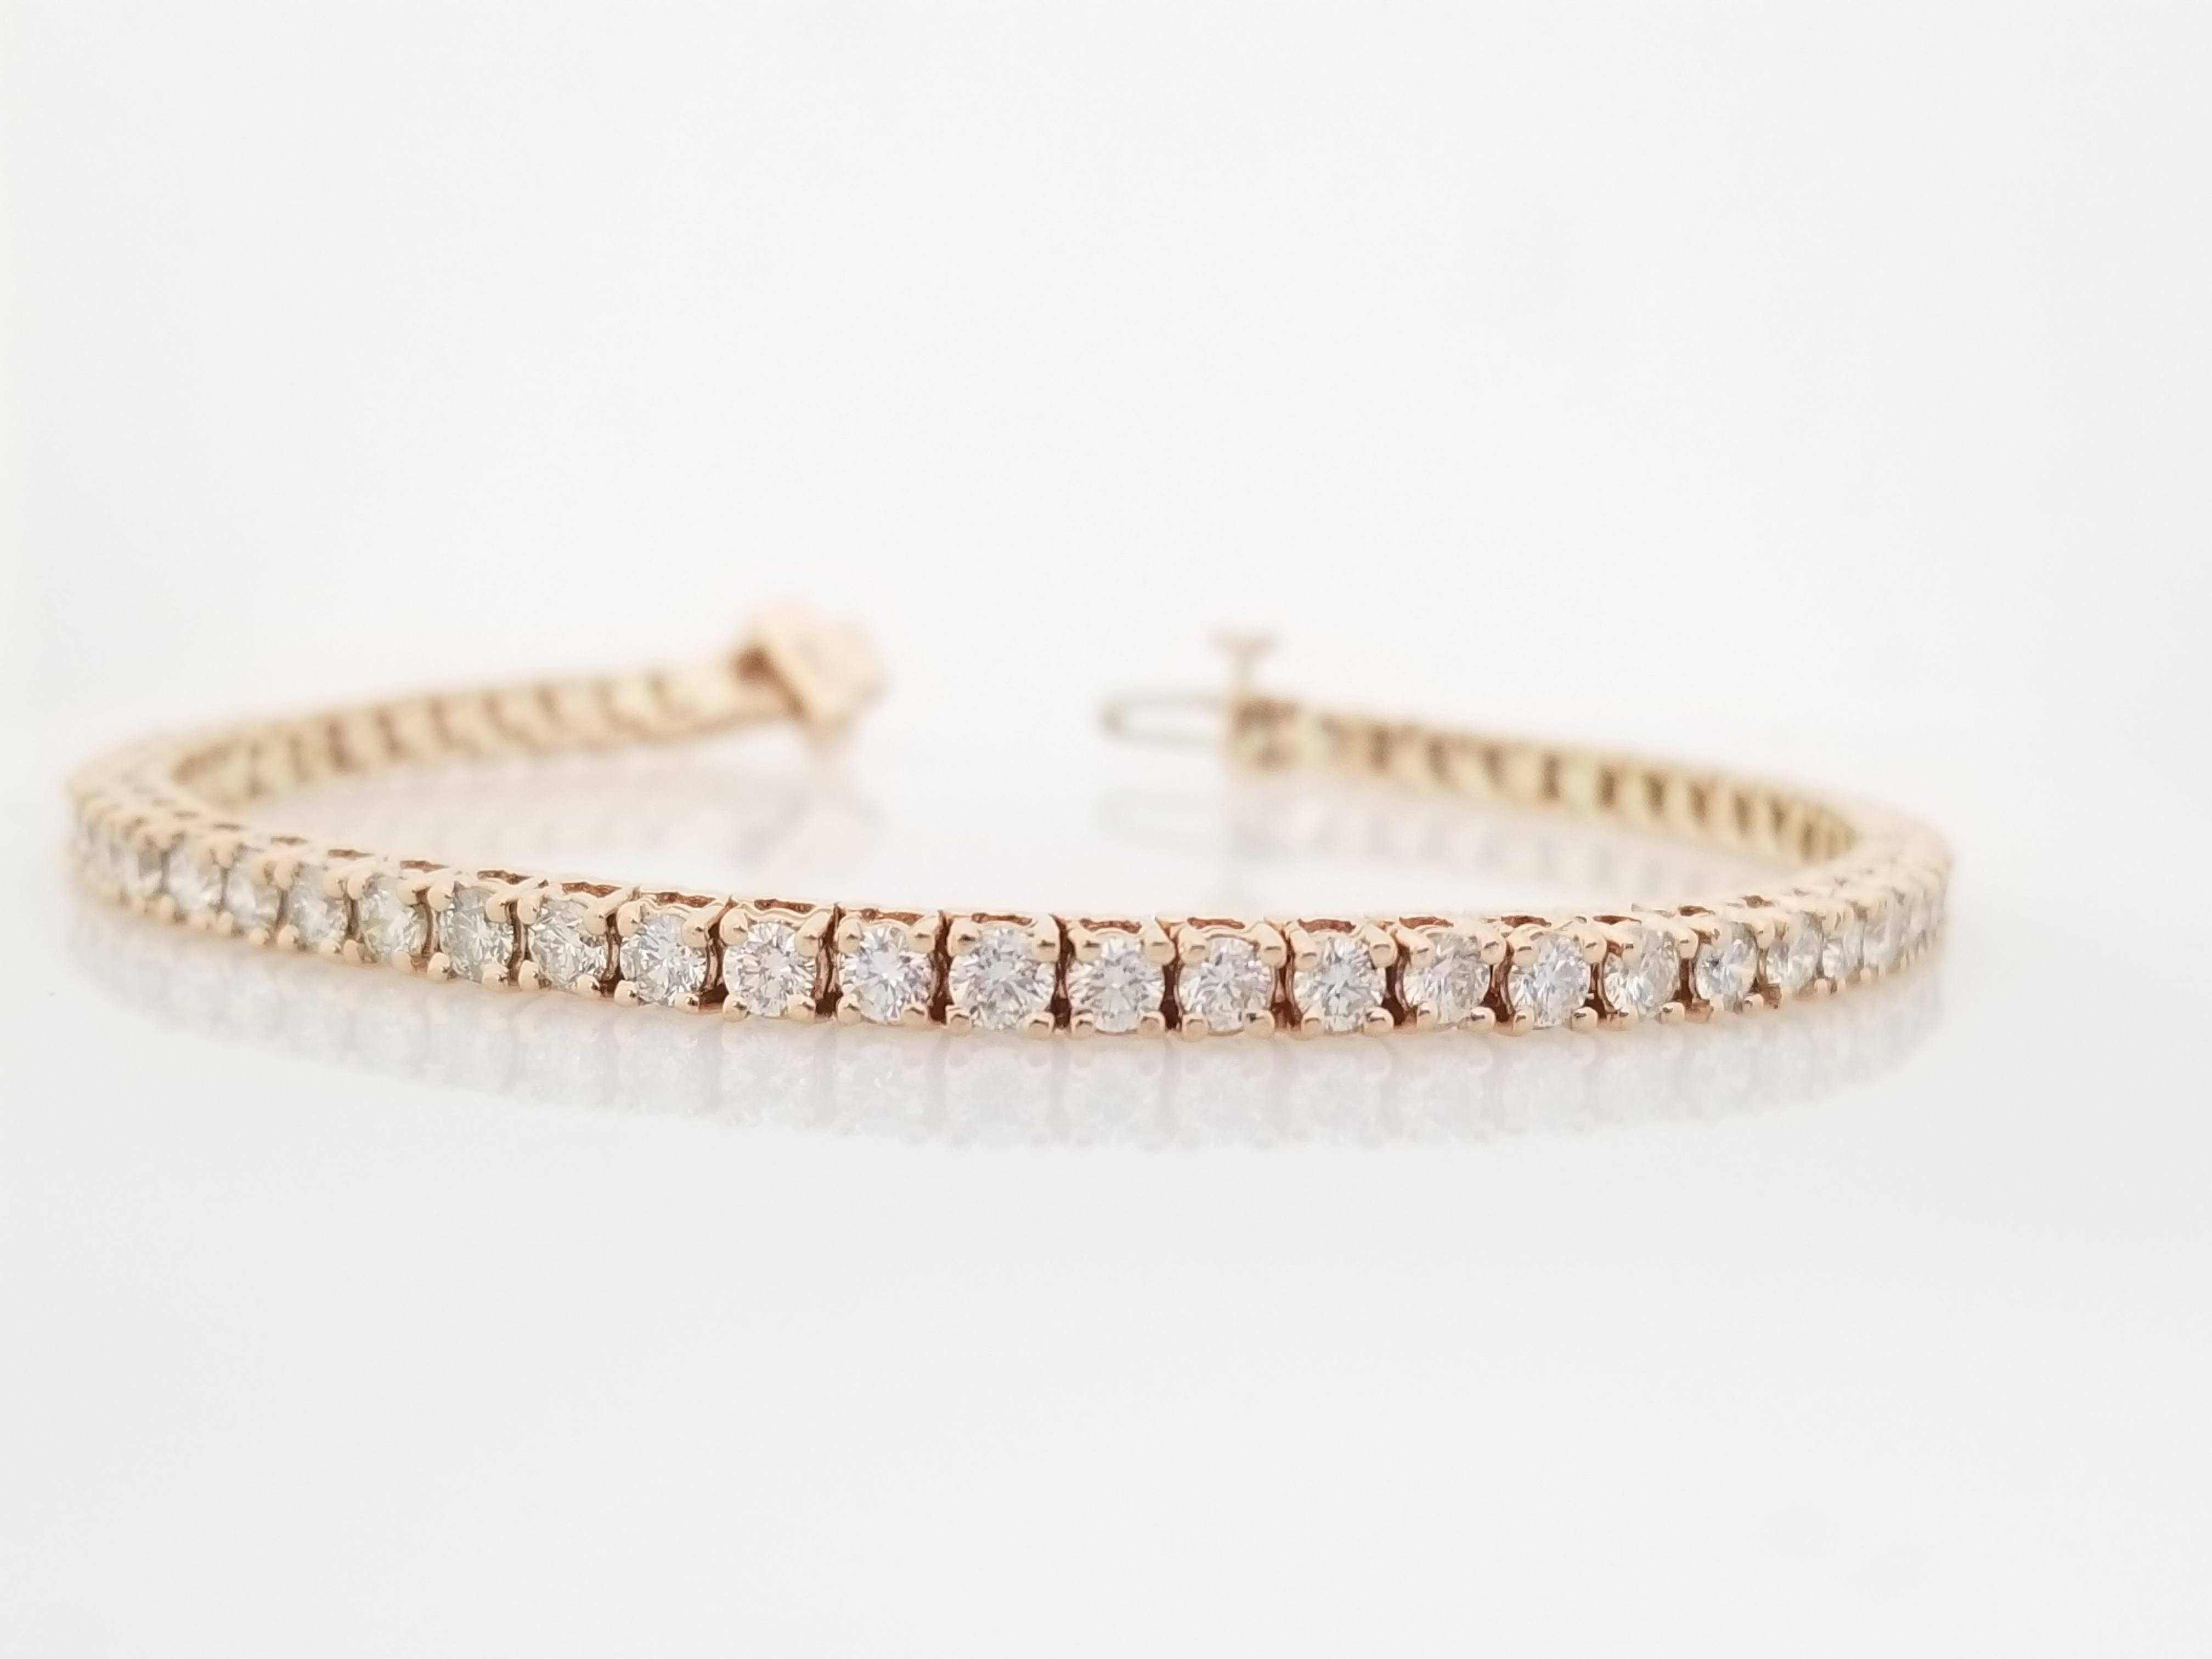 Beautiful natural diamond tennis bracelet, round-brilliant cut white diamonds clean and Excellent shine. 14K rose gold classic four-prong style for maximum light brilliance. Elegance for every moment.

7 inch length. 
3.3 mm wide. 
Average I Color,